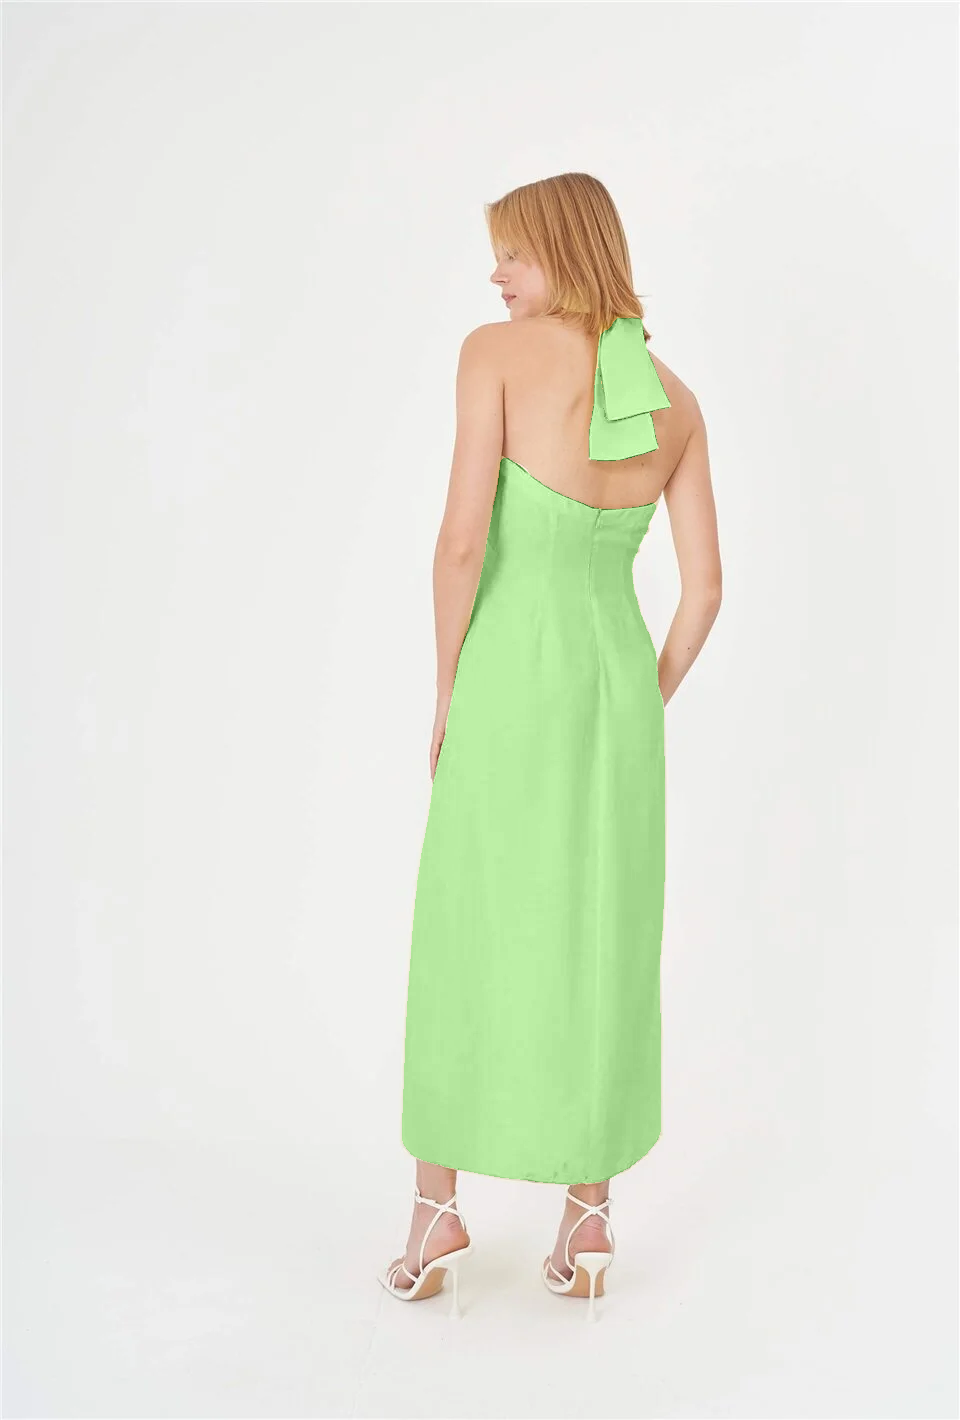 Embrace sustainable fashion with this eco-friendly green summer dress. Crafted from lightweight bio-based and organic fabric, this halter neck dress is ideal for beach outings, pool parties, social gatherings, and hot summer street fashion.